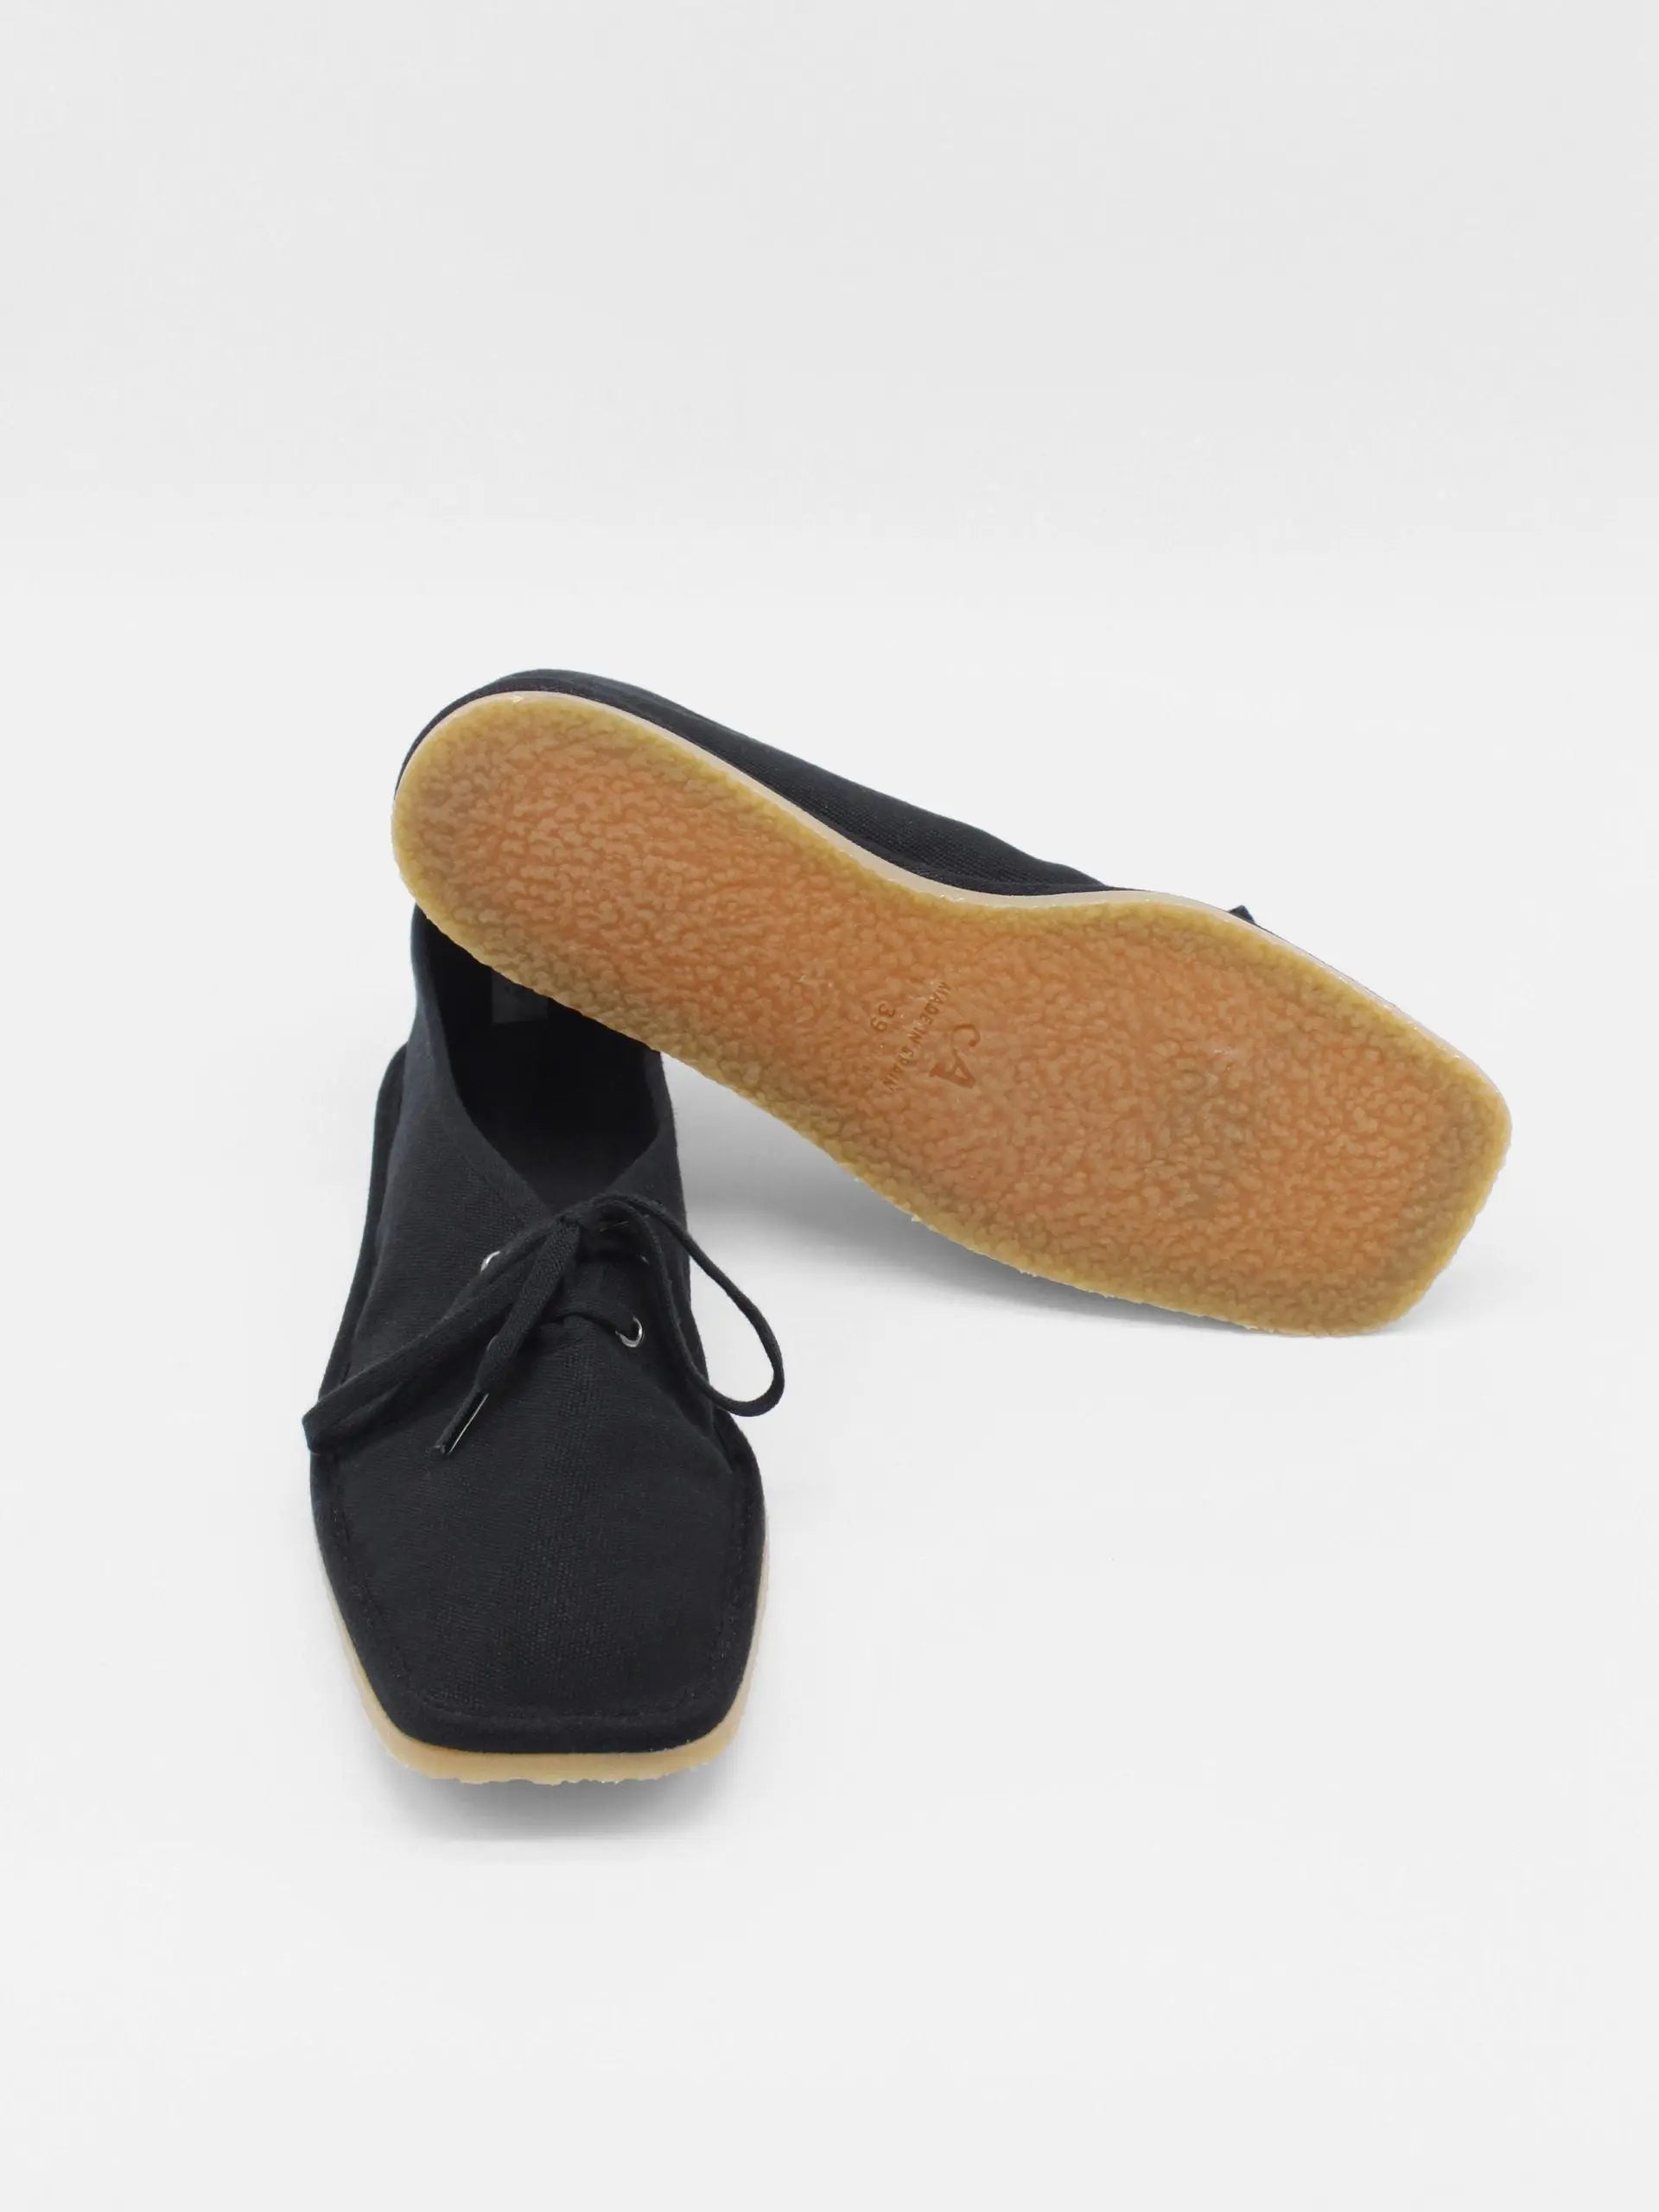 A pair of Lona Black shoes by About Arianne with a minimalist, square-toe design, positioned side by side on a white background. The shoes have black laces and appear to be made of a fabric material, reflecting the chic style found in Barcelona's finest stores.